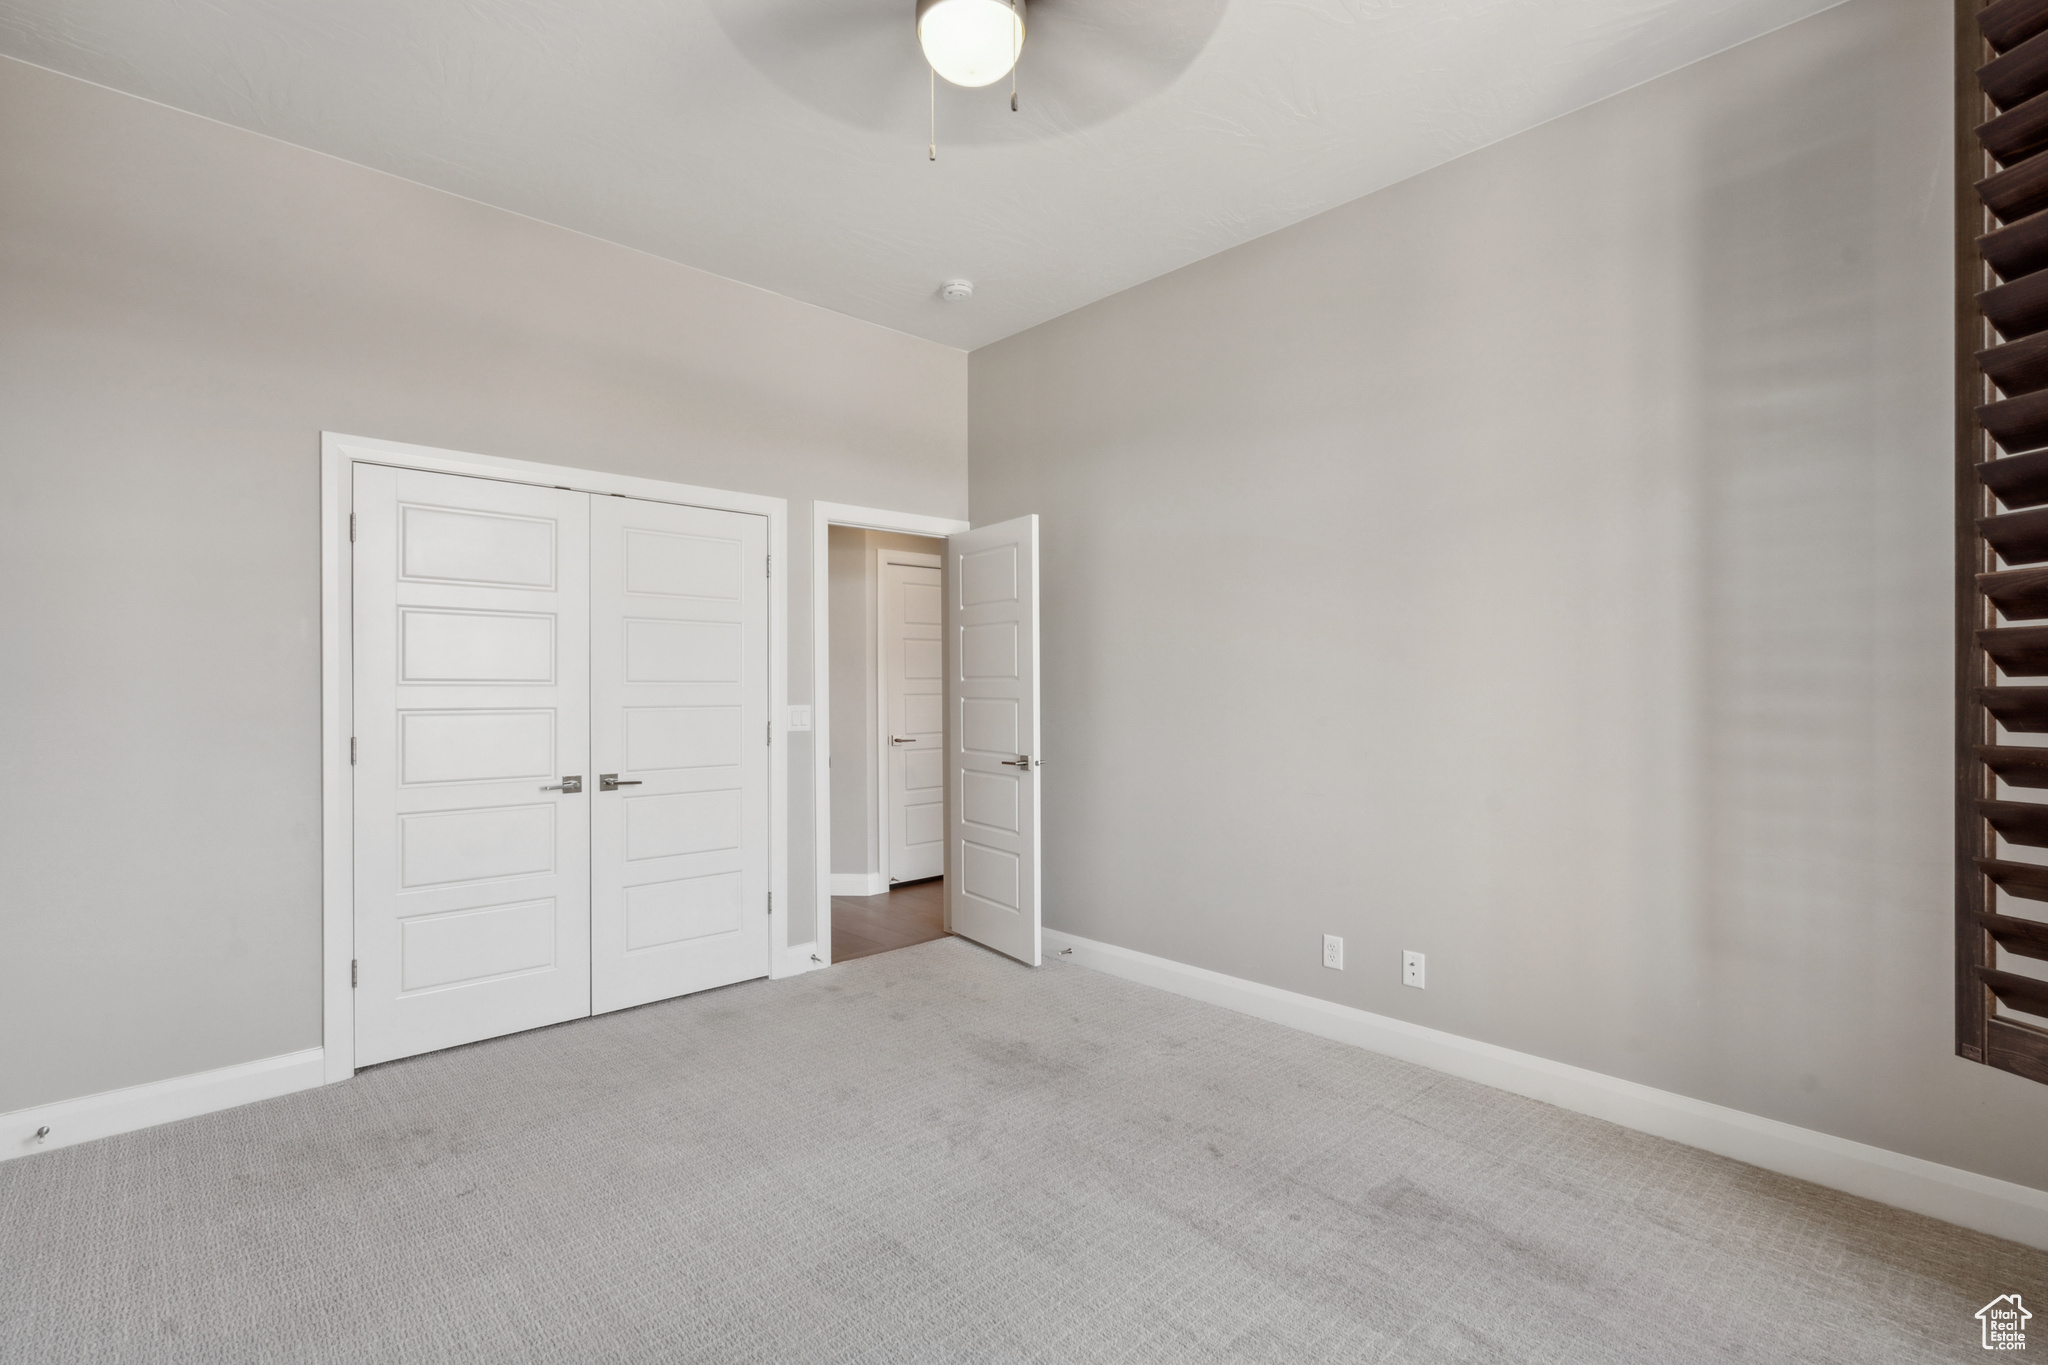 Unfurnished bedroom featuring ceiling fan and carpet floors